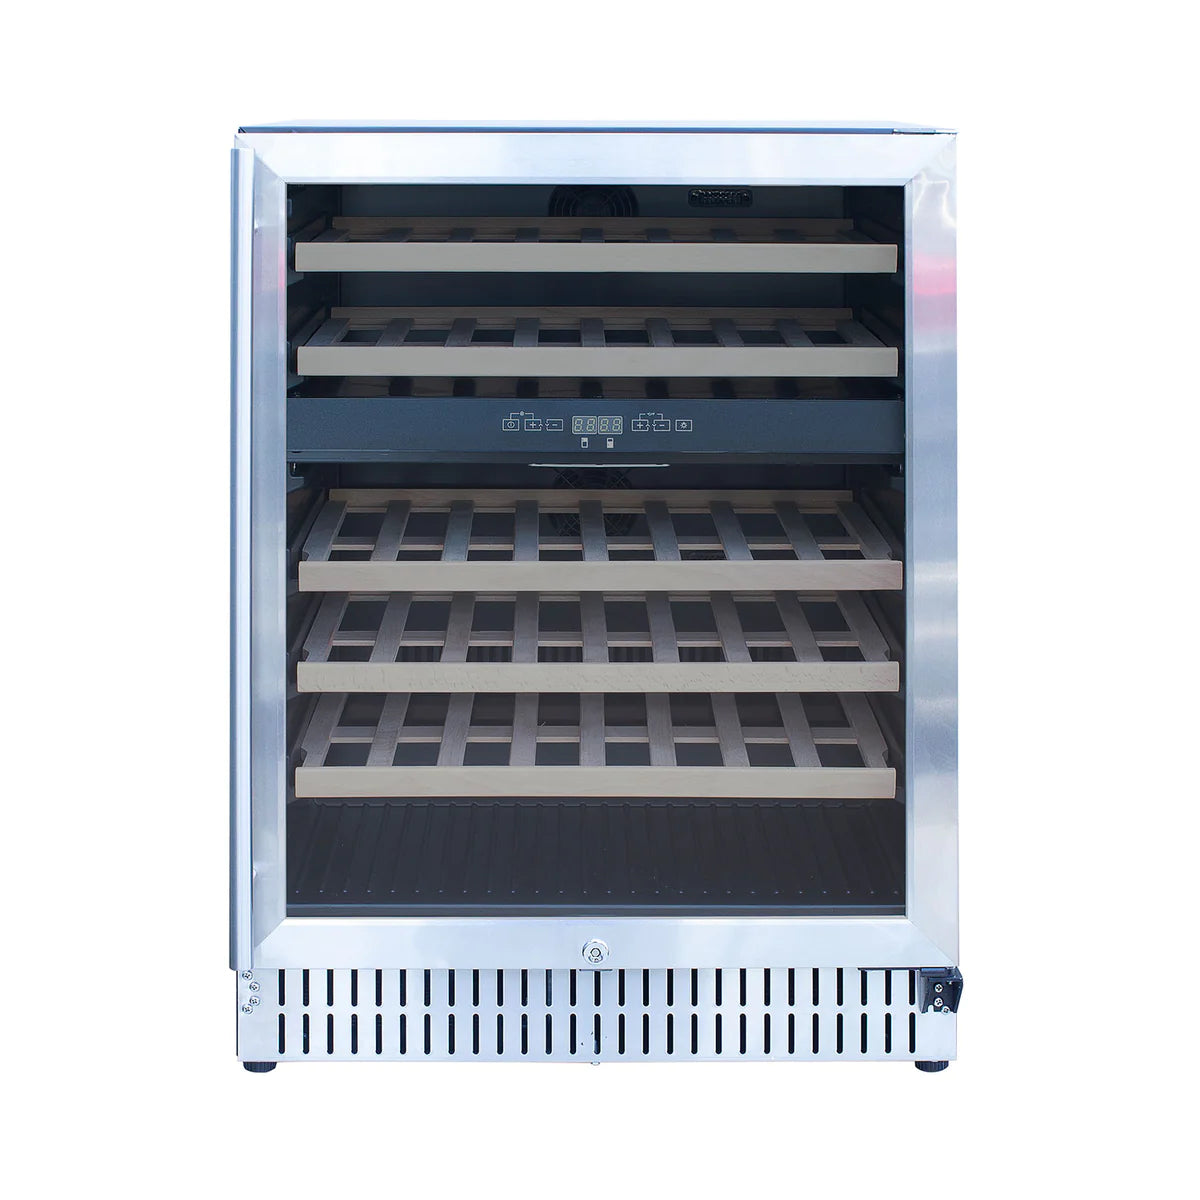 Outdoor Rated Dual Zone Wine Cooler - 24"